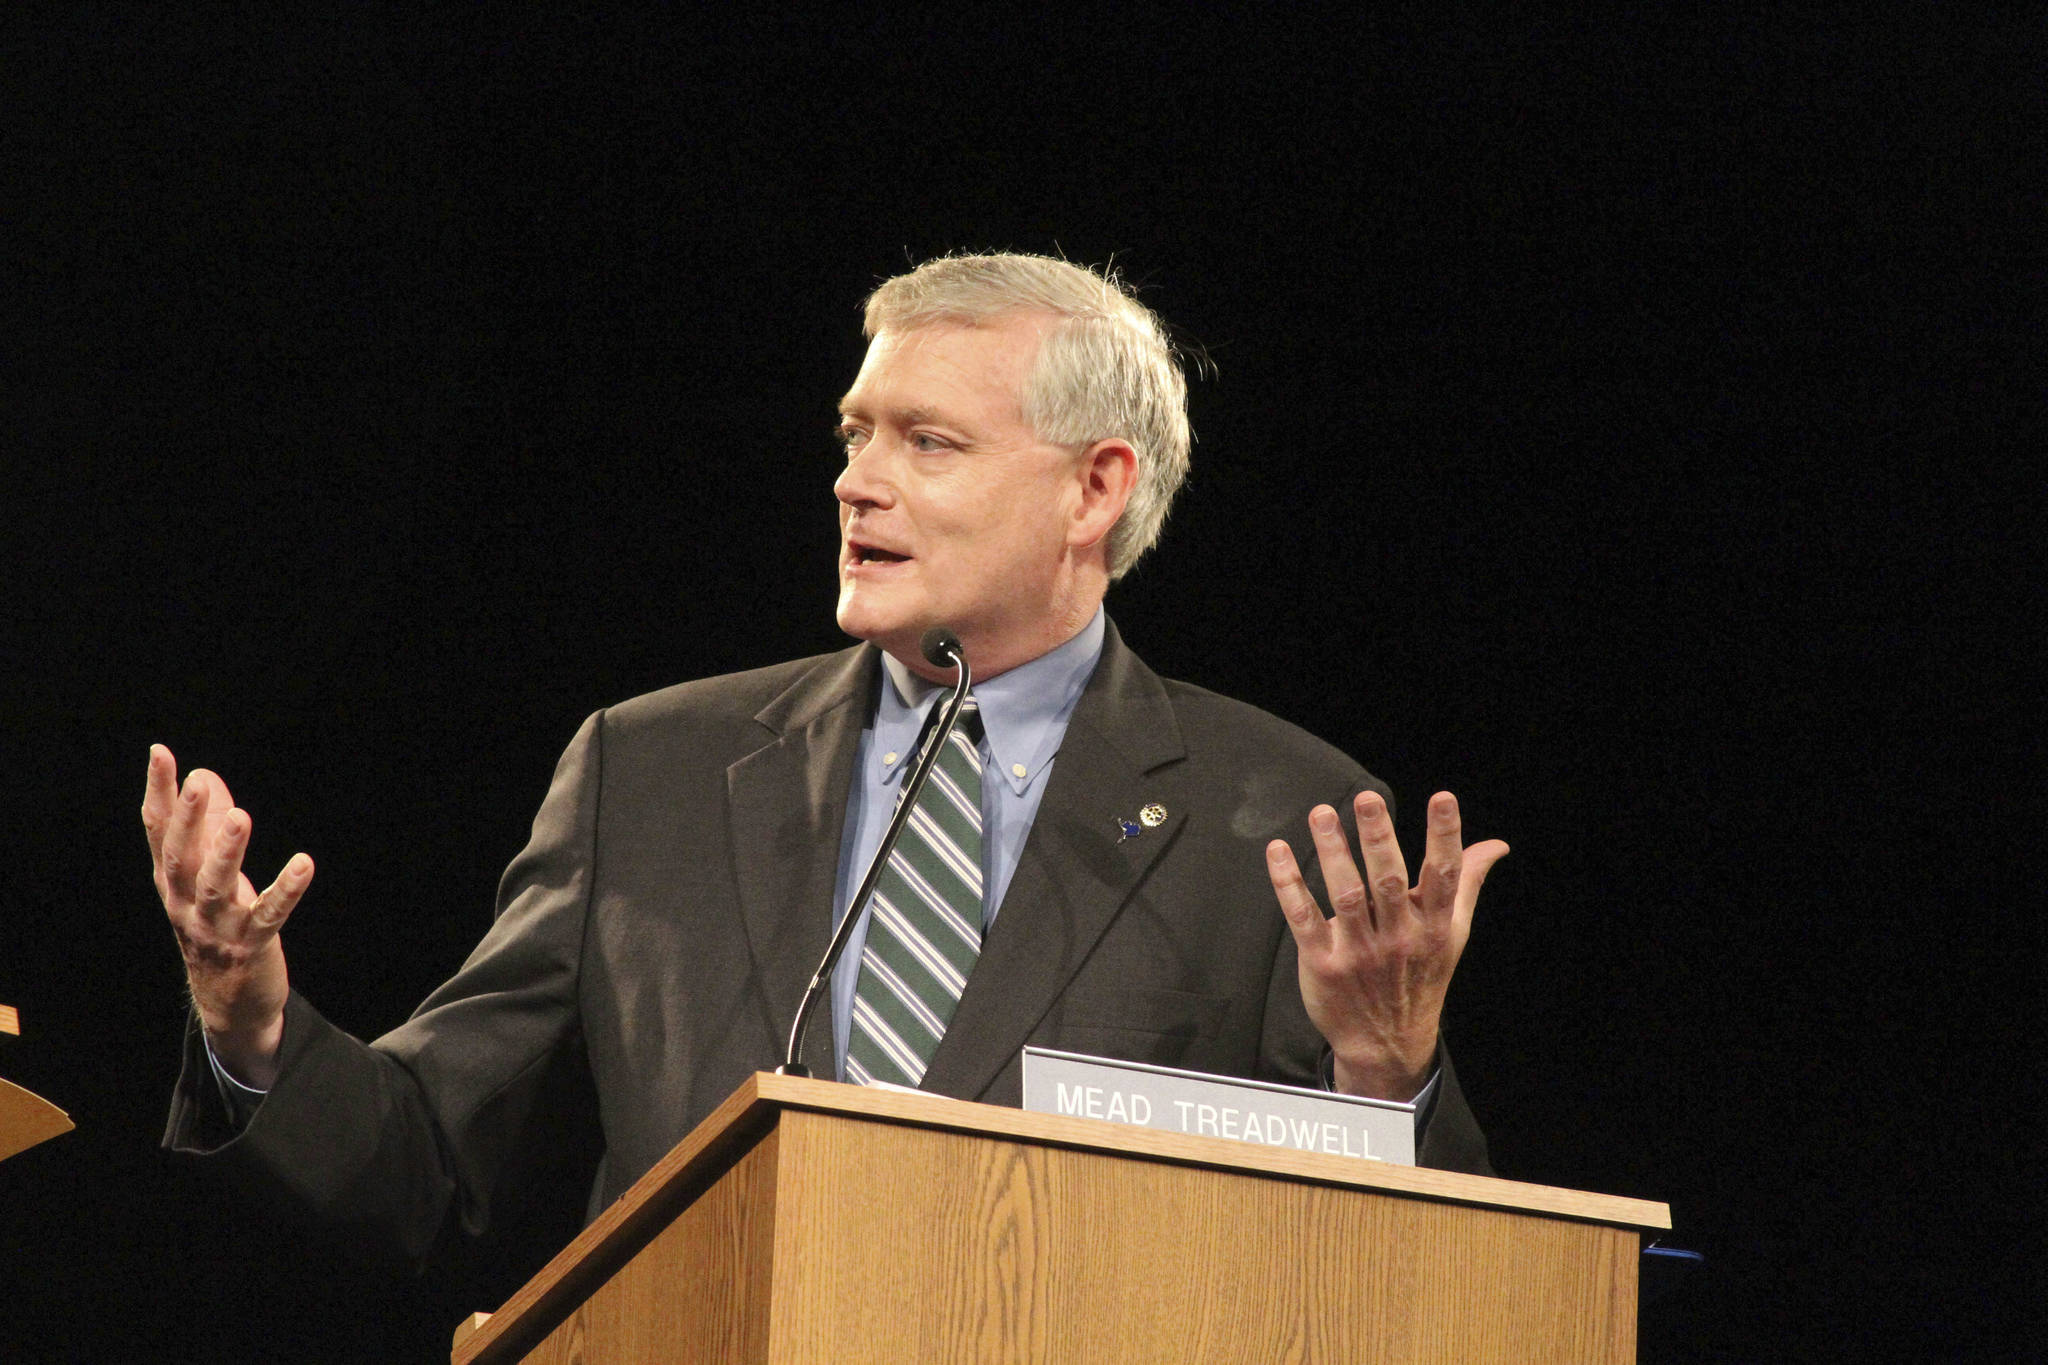 In this Aug. 10, 2014 file photo, Alaska Lt. Gov. Mead Treadwell, talks during a live televised debate in Anchorage, Alaska. (AP Photo/Mark Thiessen, File)